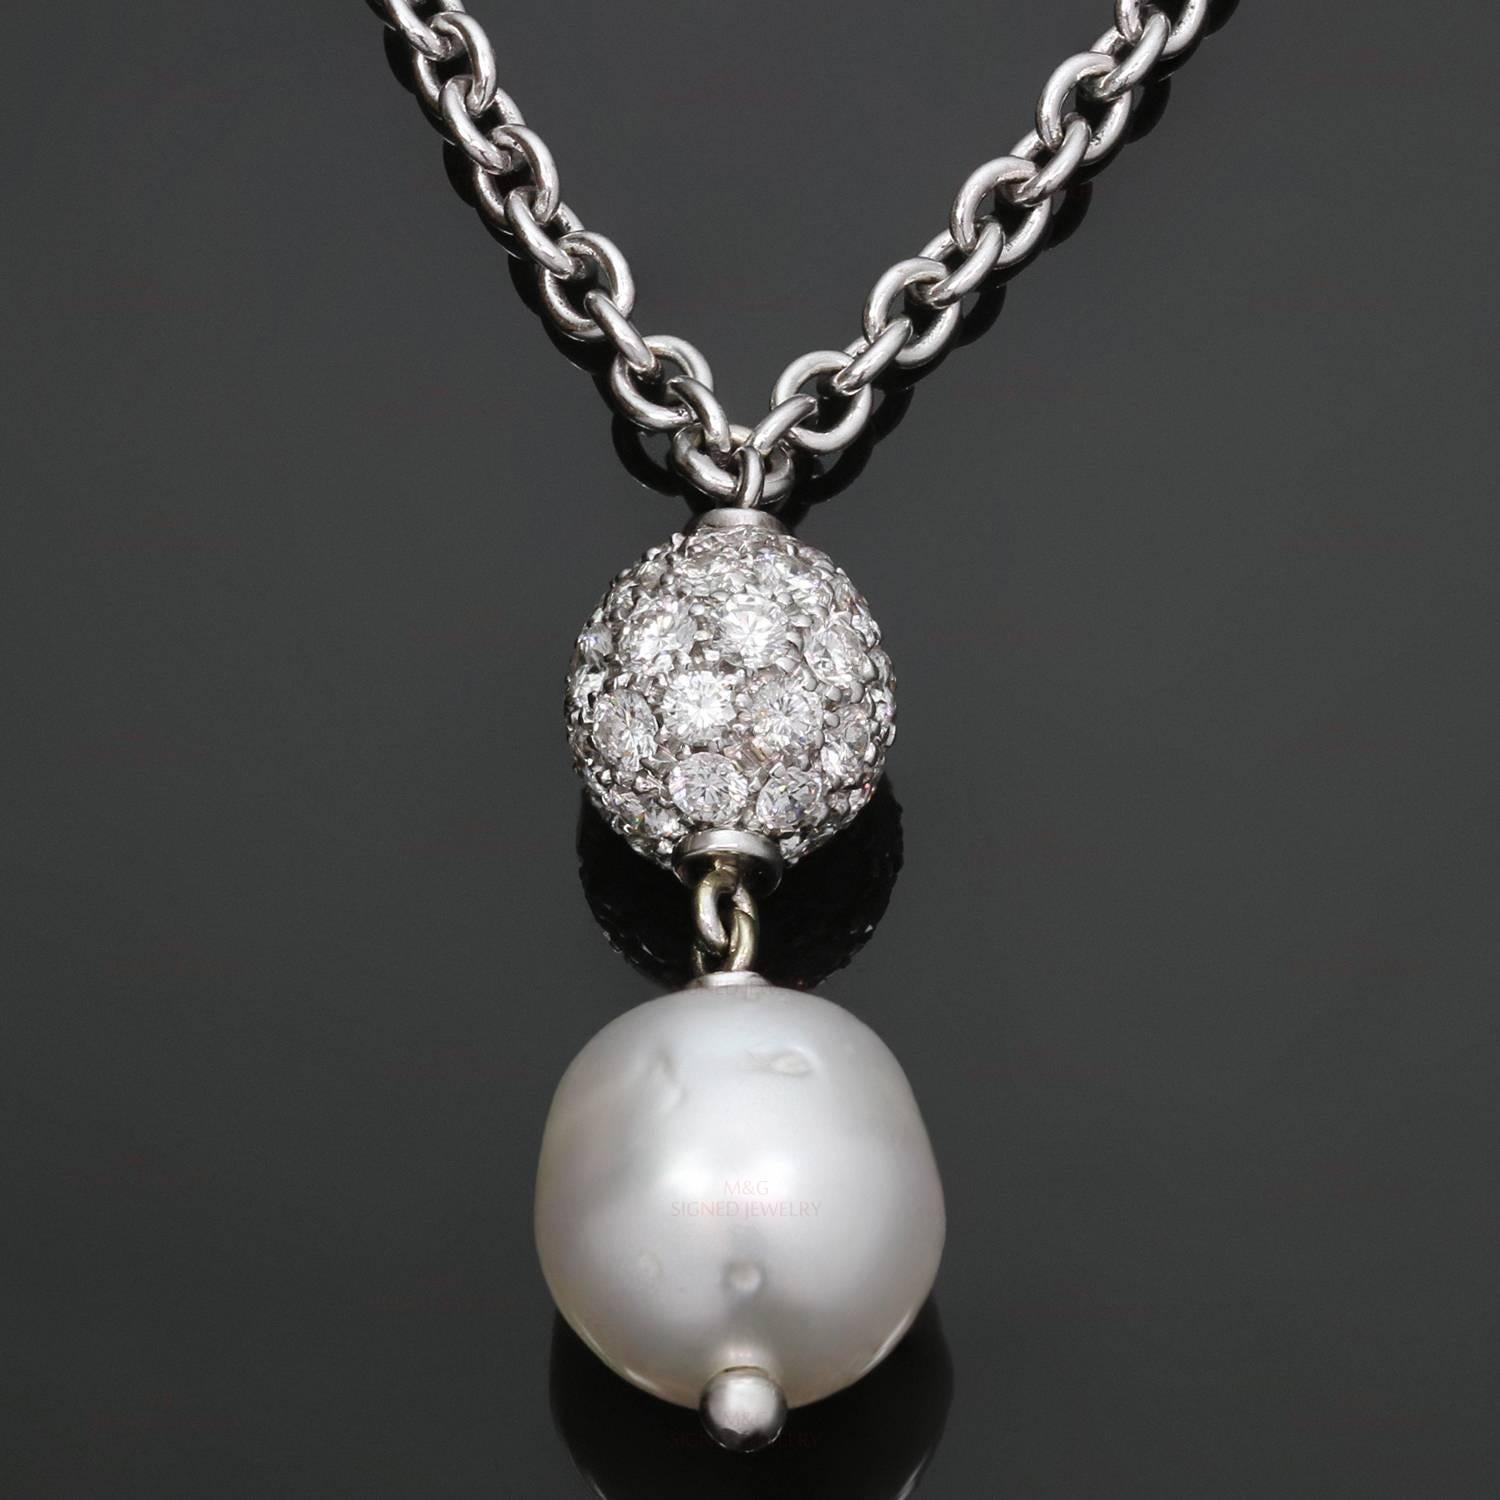 This elegant and timeless necklace is made in 18k white gold and features a beautiful 11.0mm Baroque South See pearl suspended from a pave-set diamond ball and completed by a circular link chain. Measurements: 27mm drop, 16